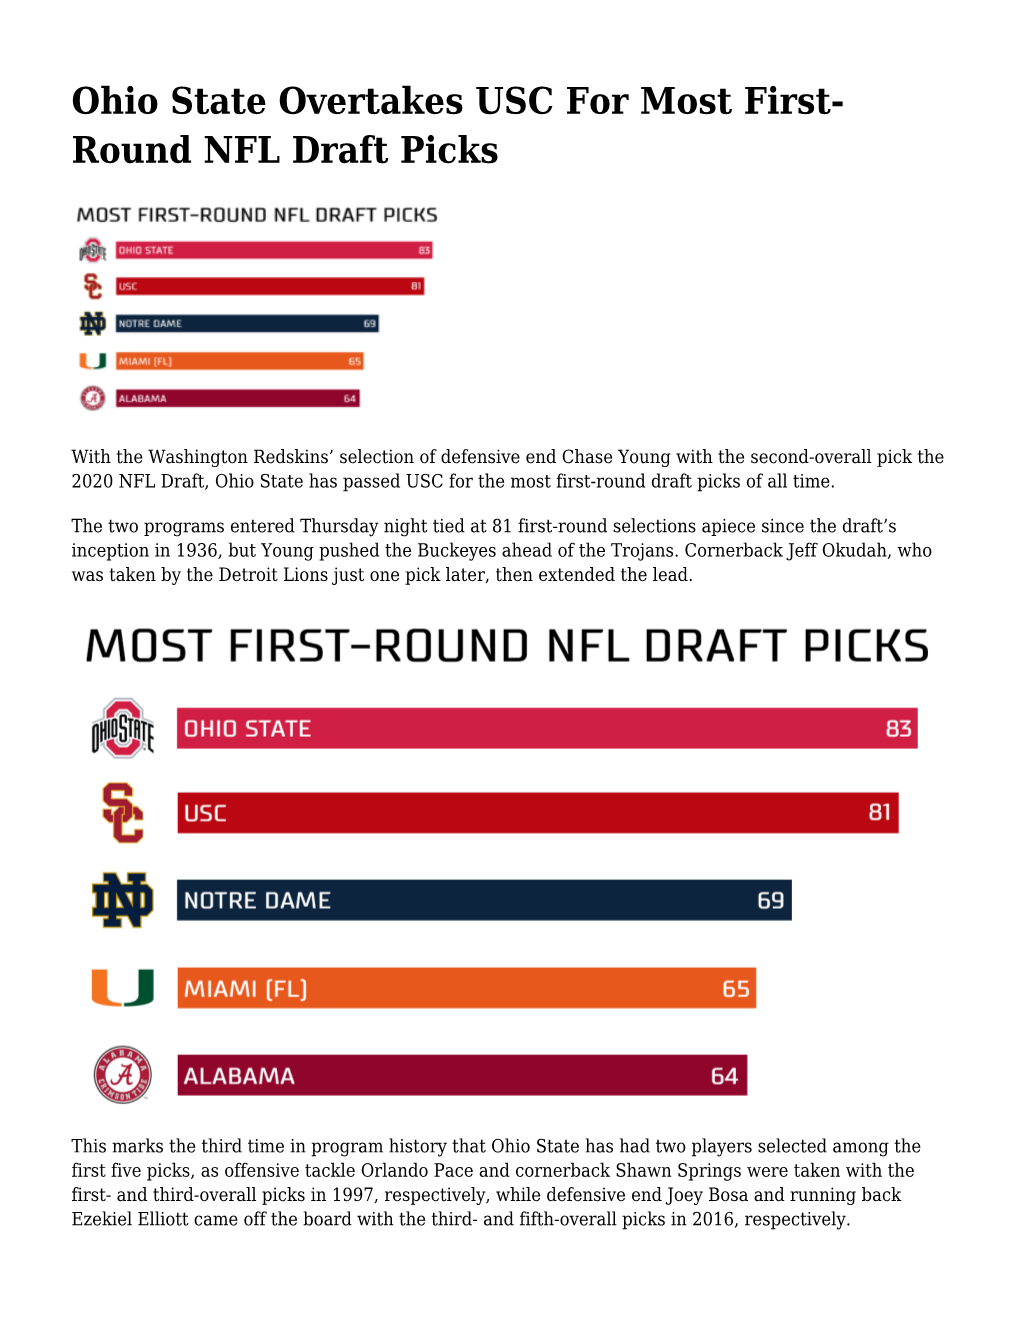 Ohio State Overtakes USC for Most First-Round NFL Draft Picks